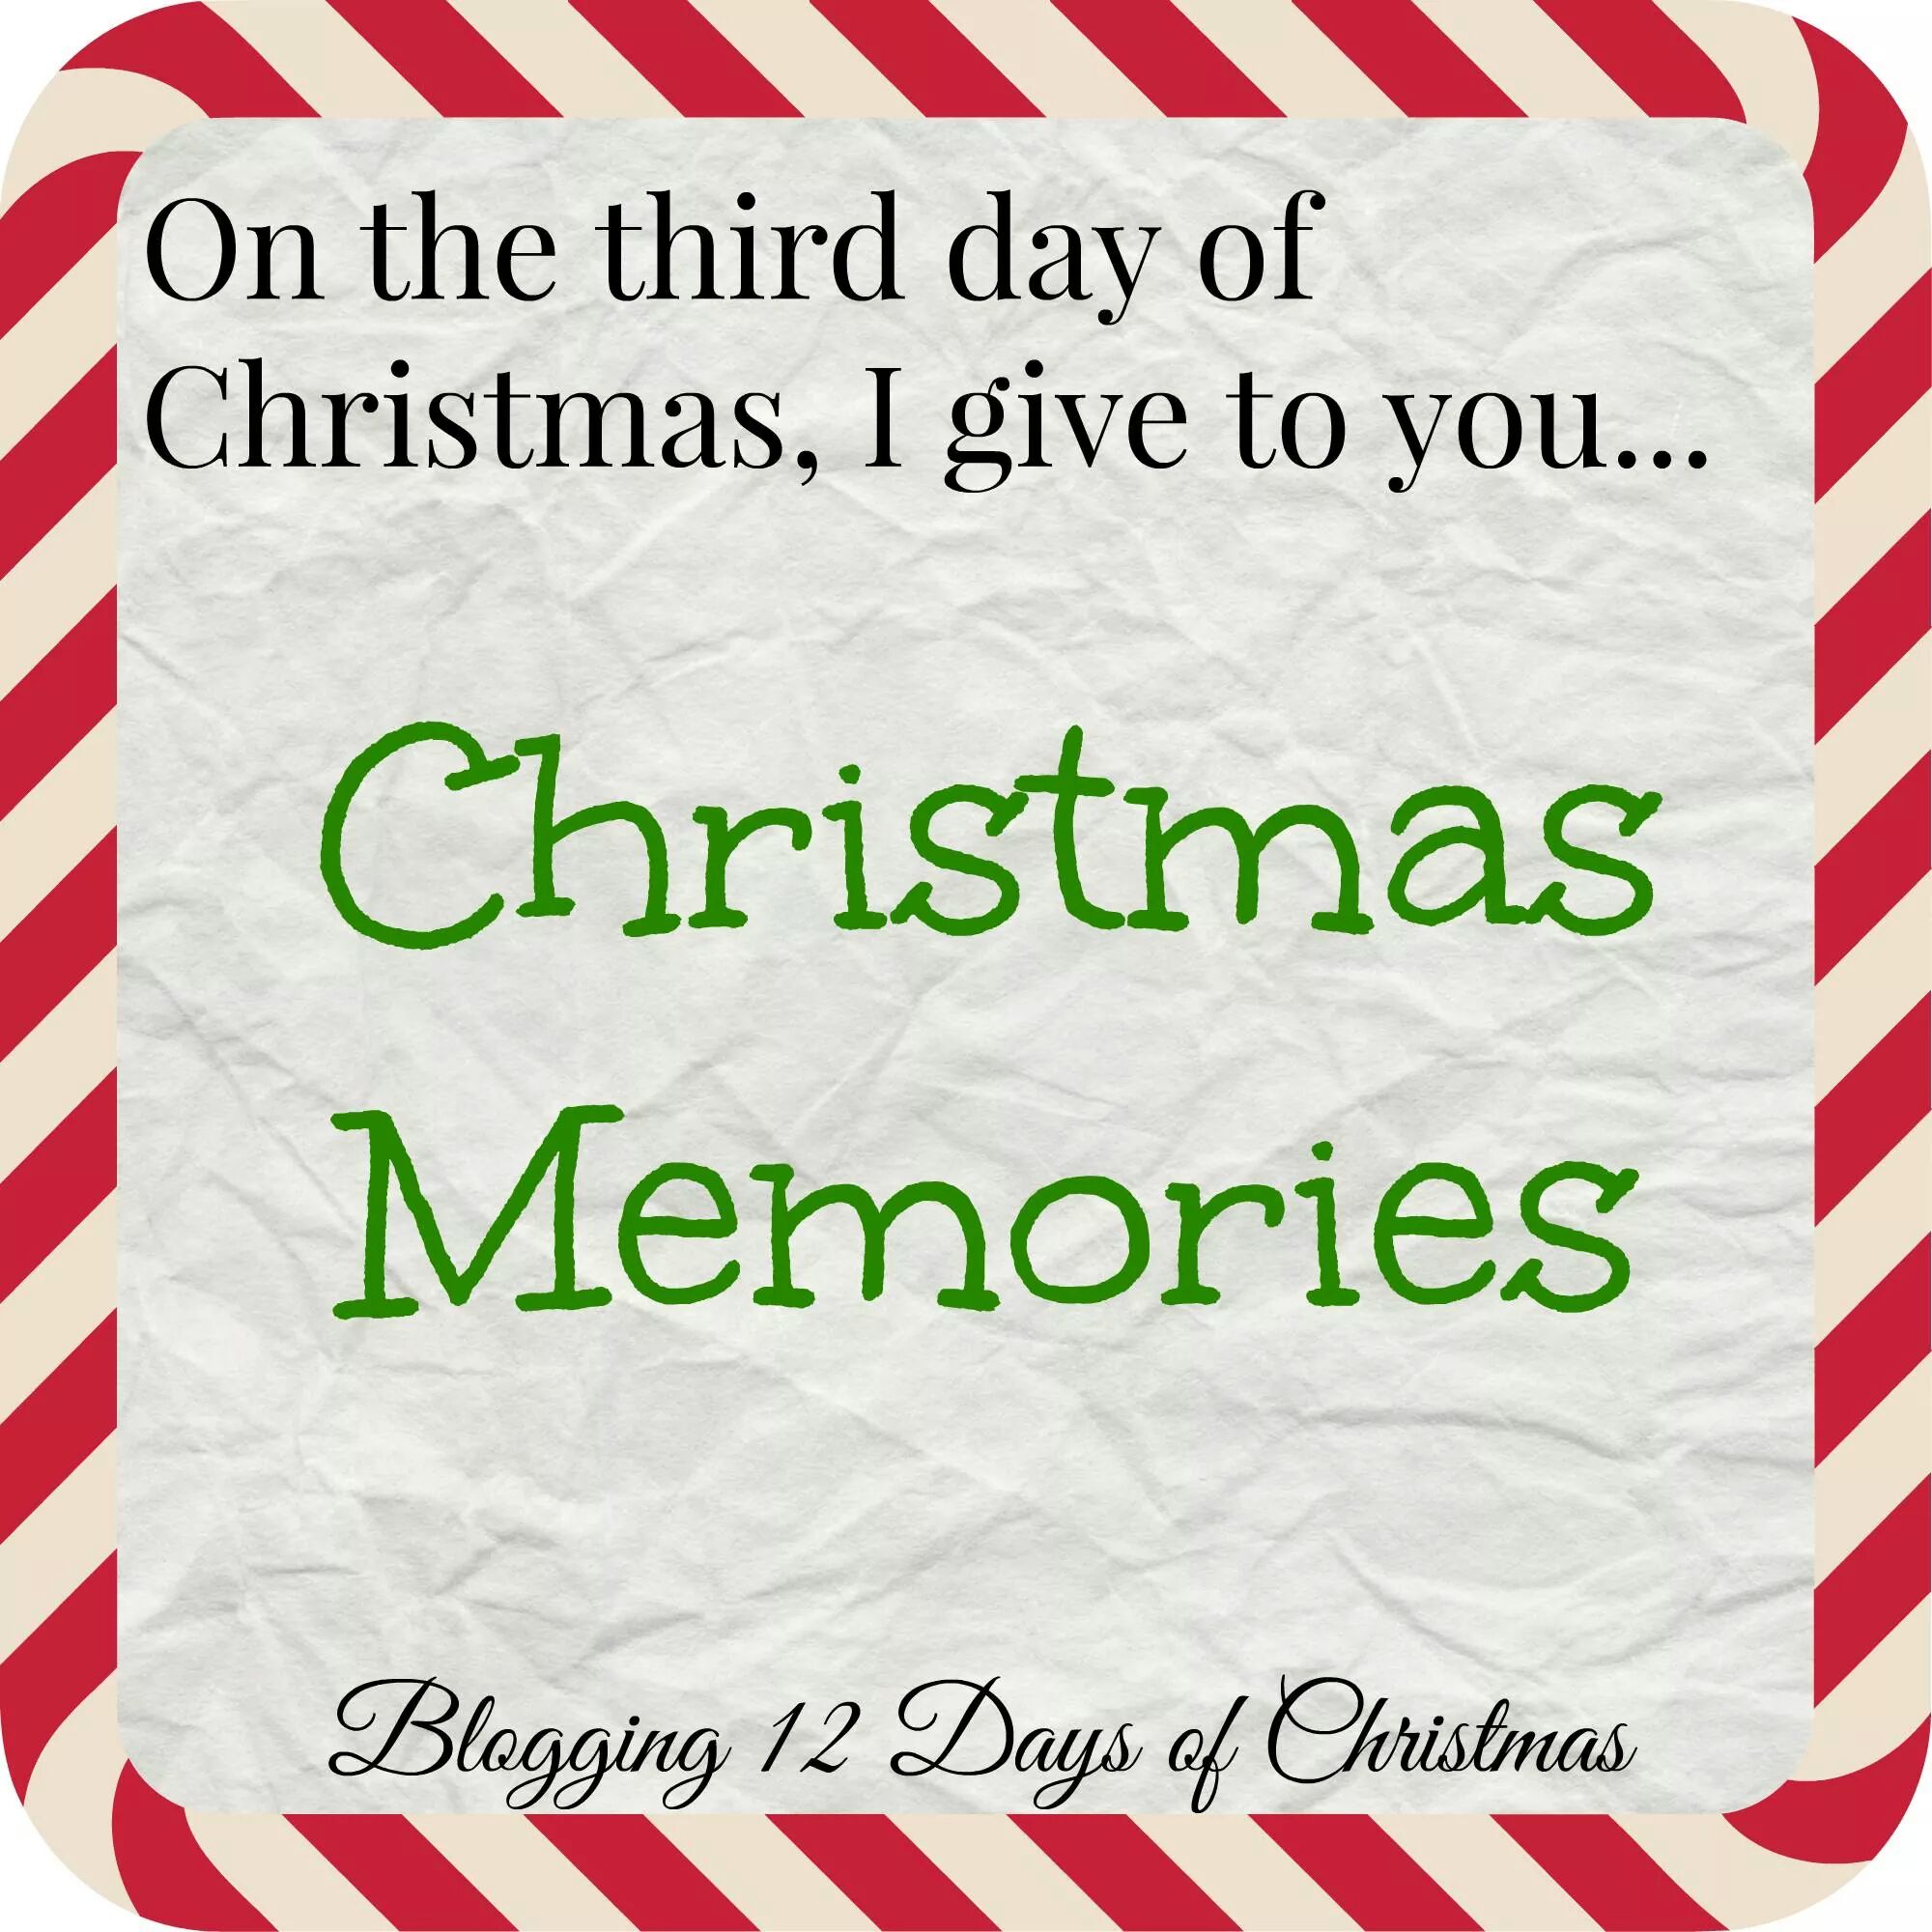 Day 3 of Blogging Christmas